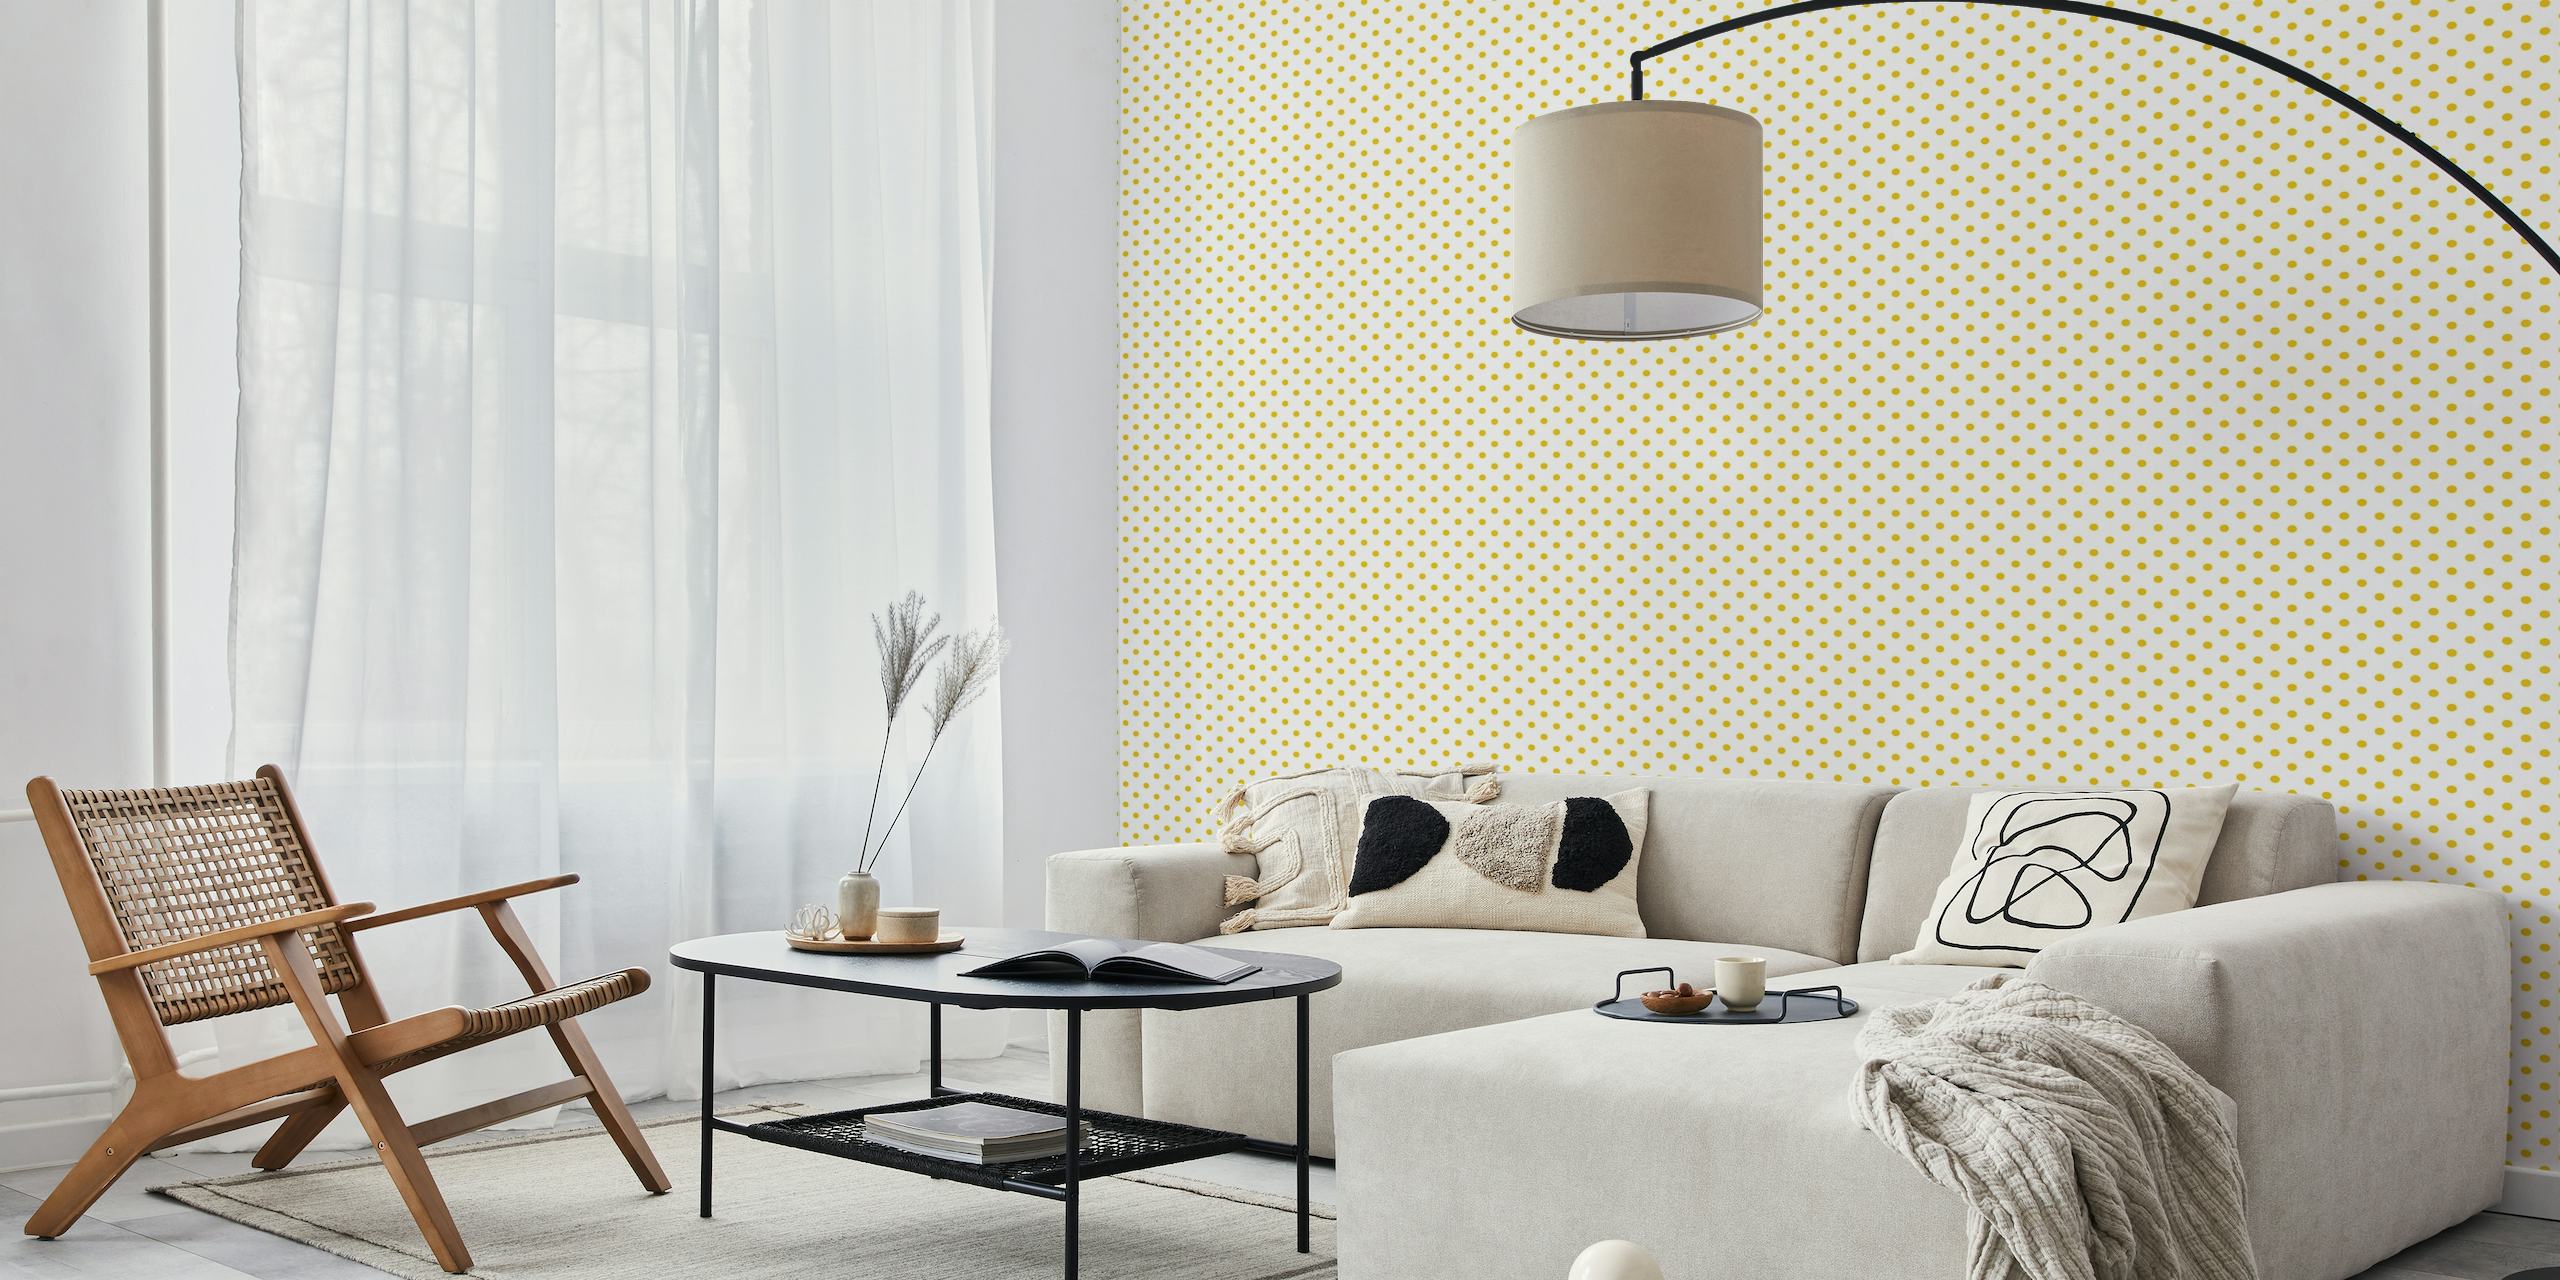 Gold Polka Dots wall mural on a white background